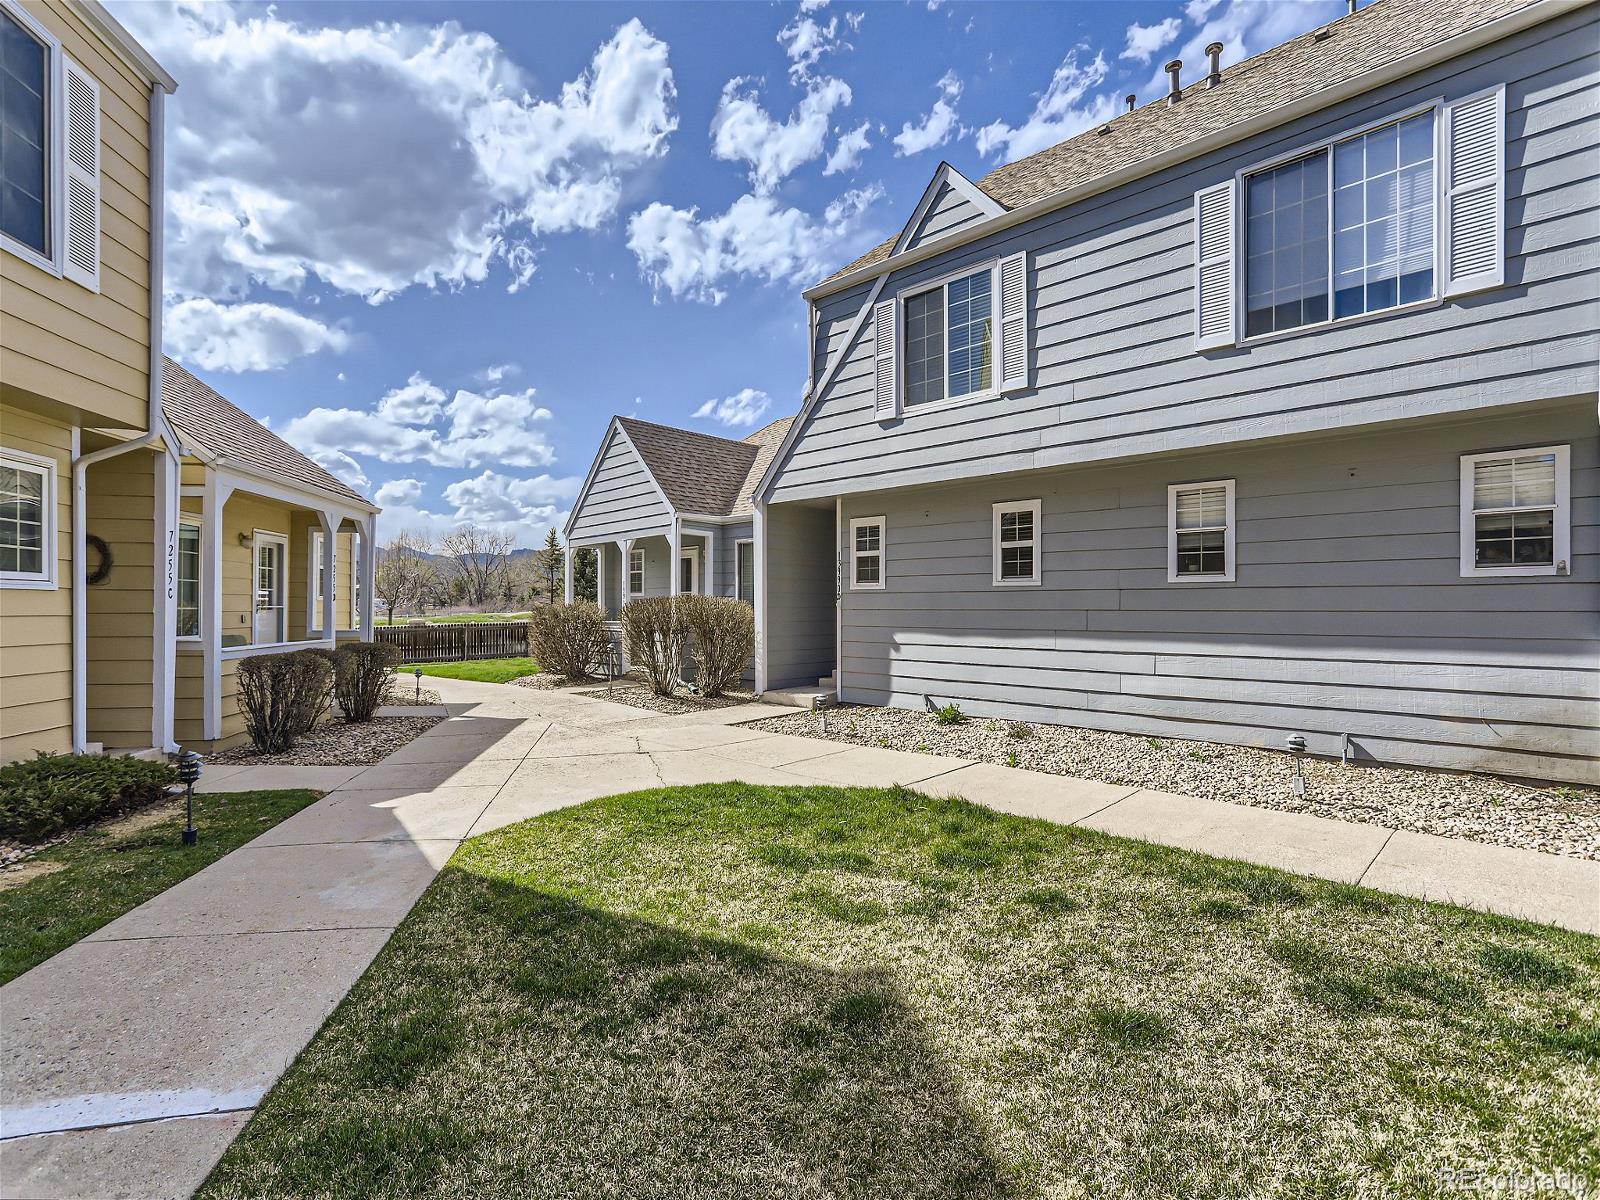 13990 W 72nd Place D, Arvada  MLS: 5591640 Beds: 2 Baths: 2 Price: $385,000